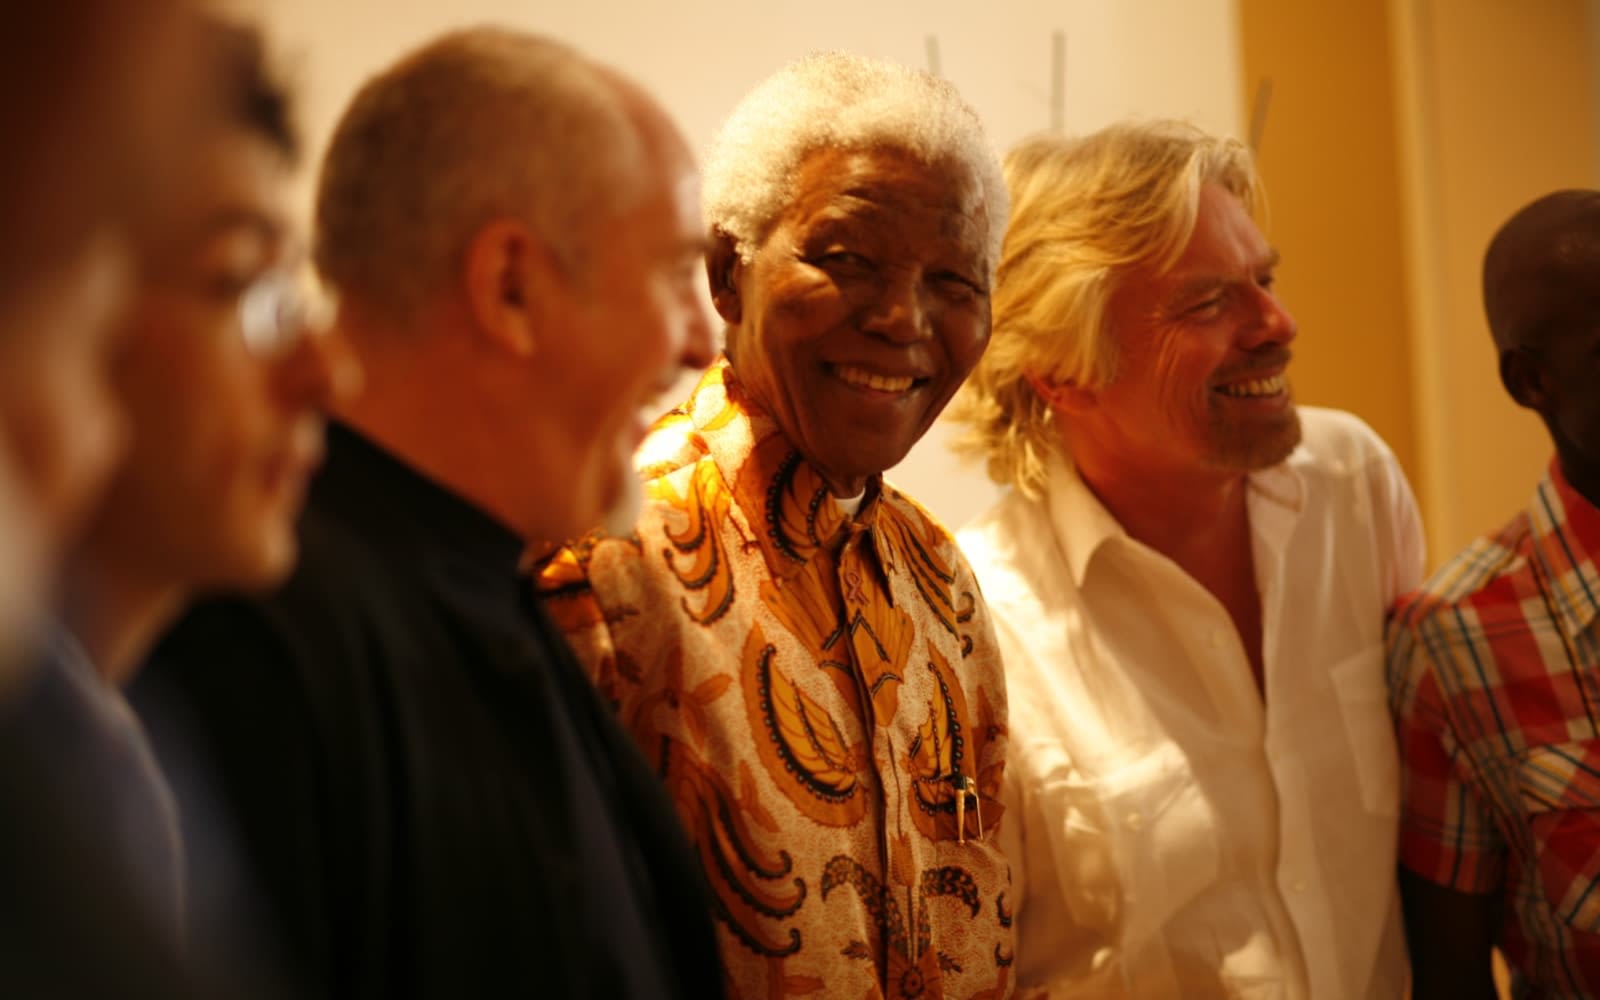 Richard Branson standing next to Nelson Mandela and others